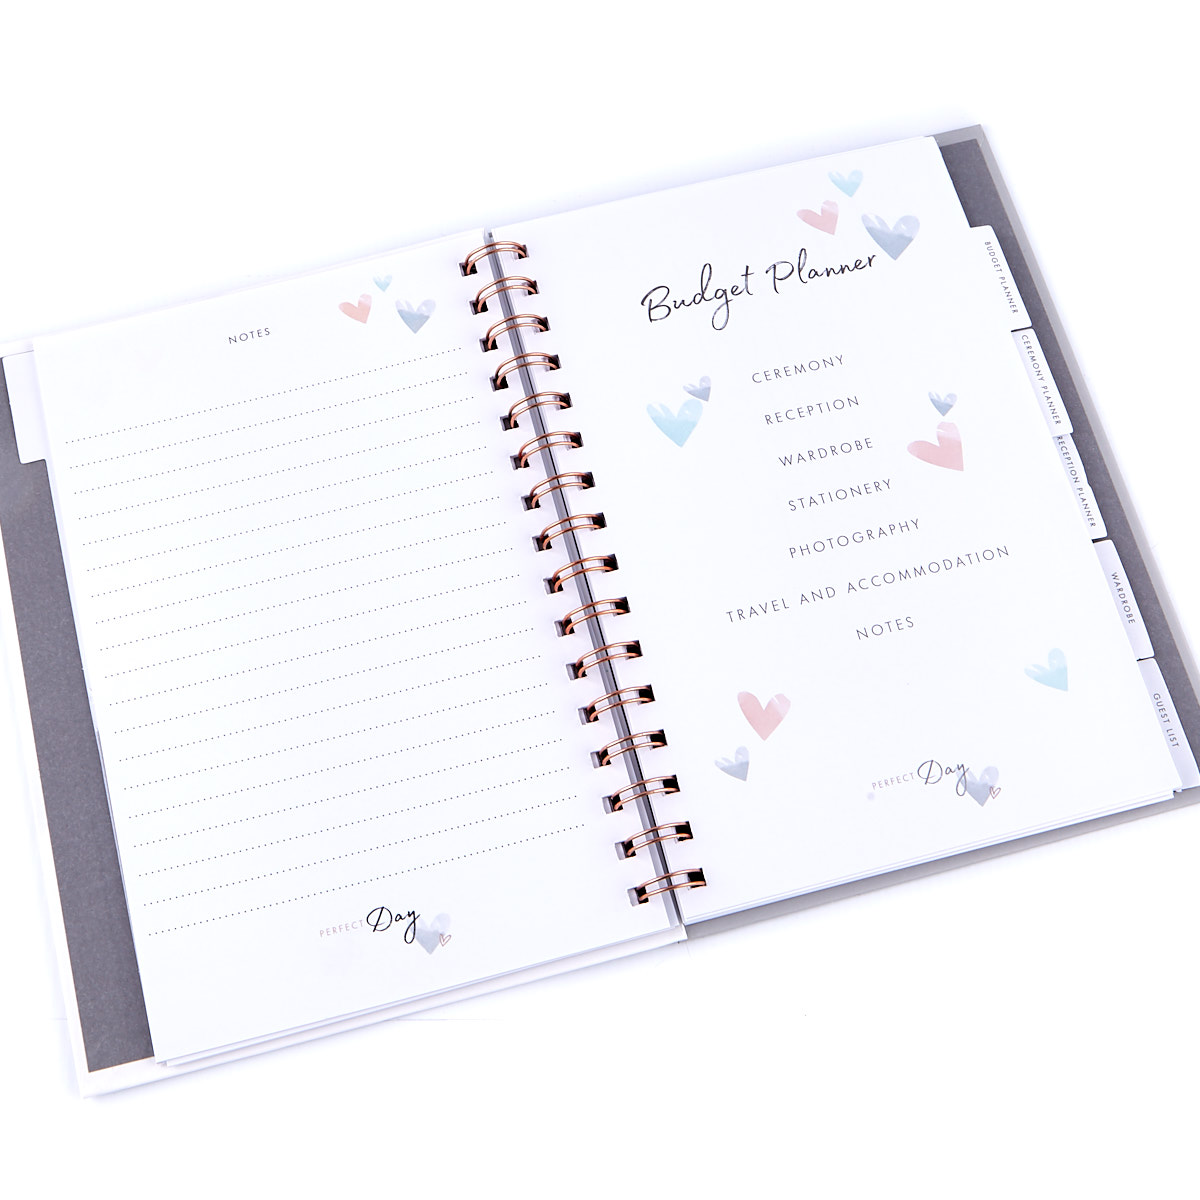 Our Dream Day Wedding Planner - Silver Hearts